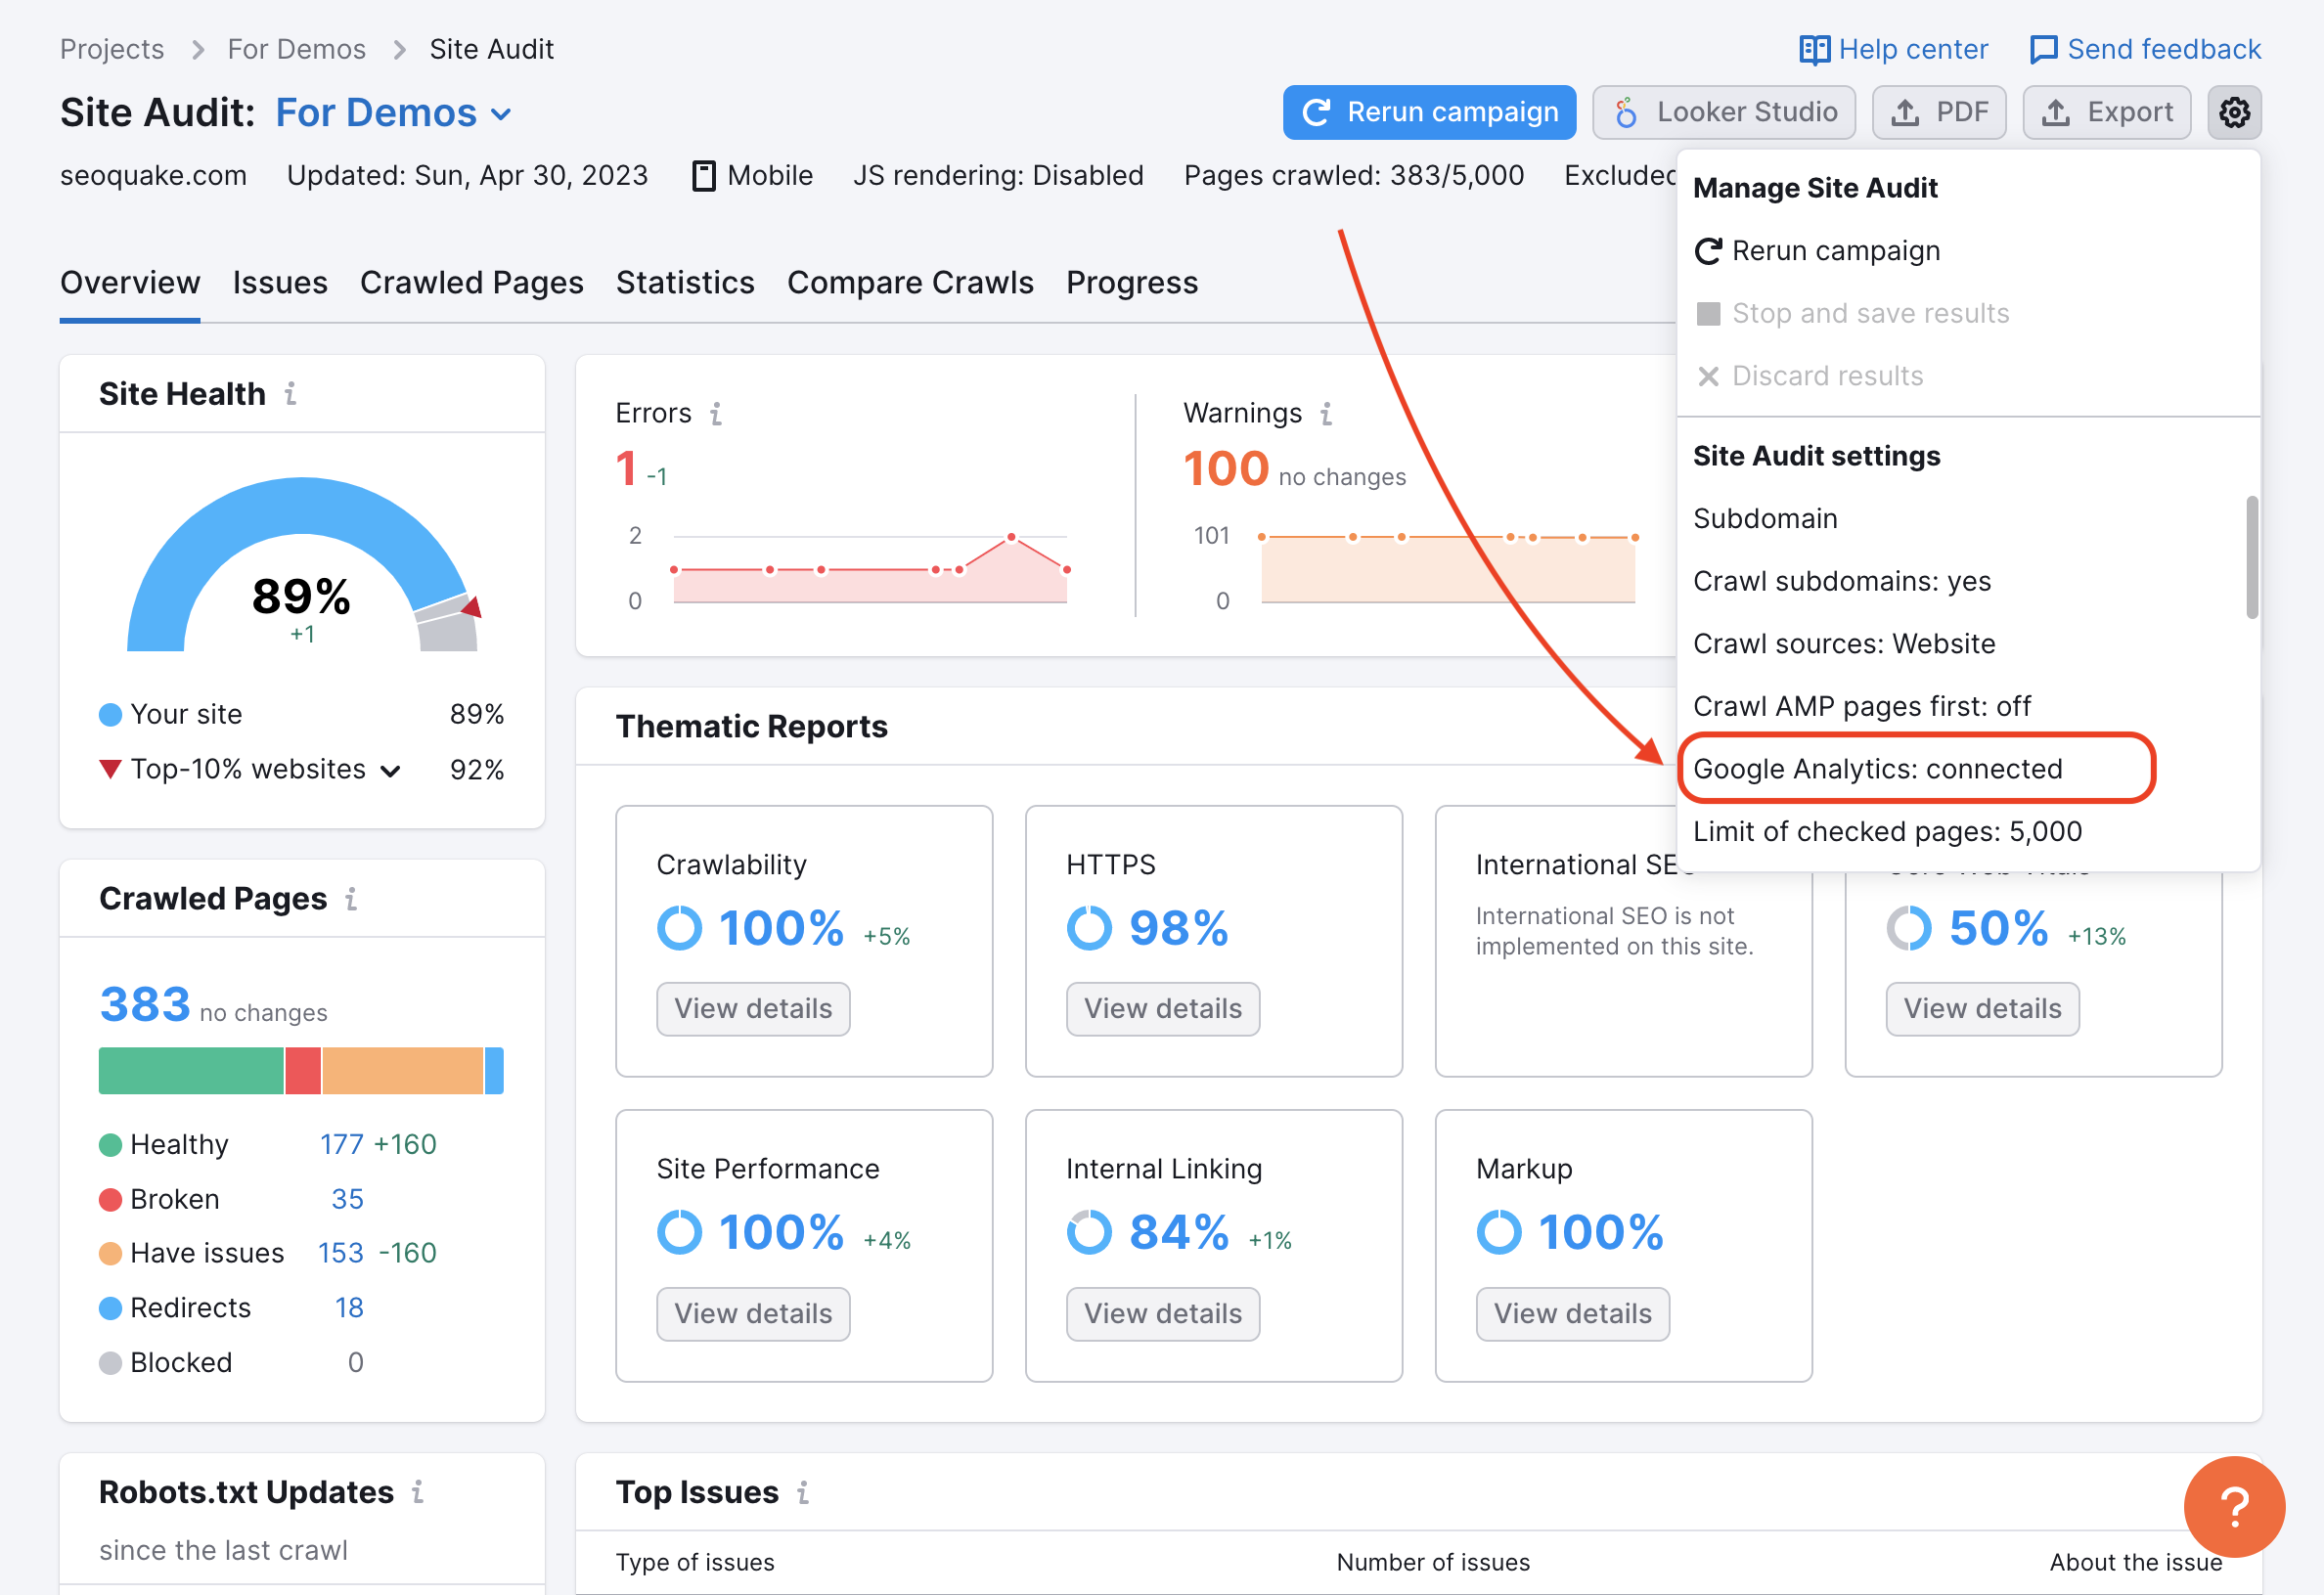 Where to find Google Analytics integration settings in Site Audit.